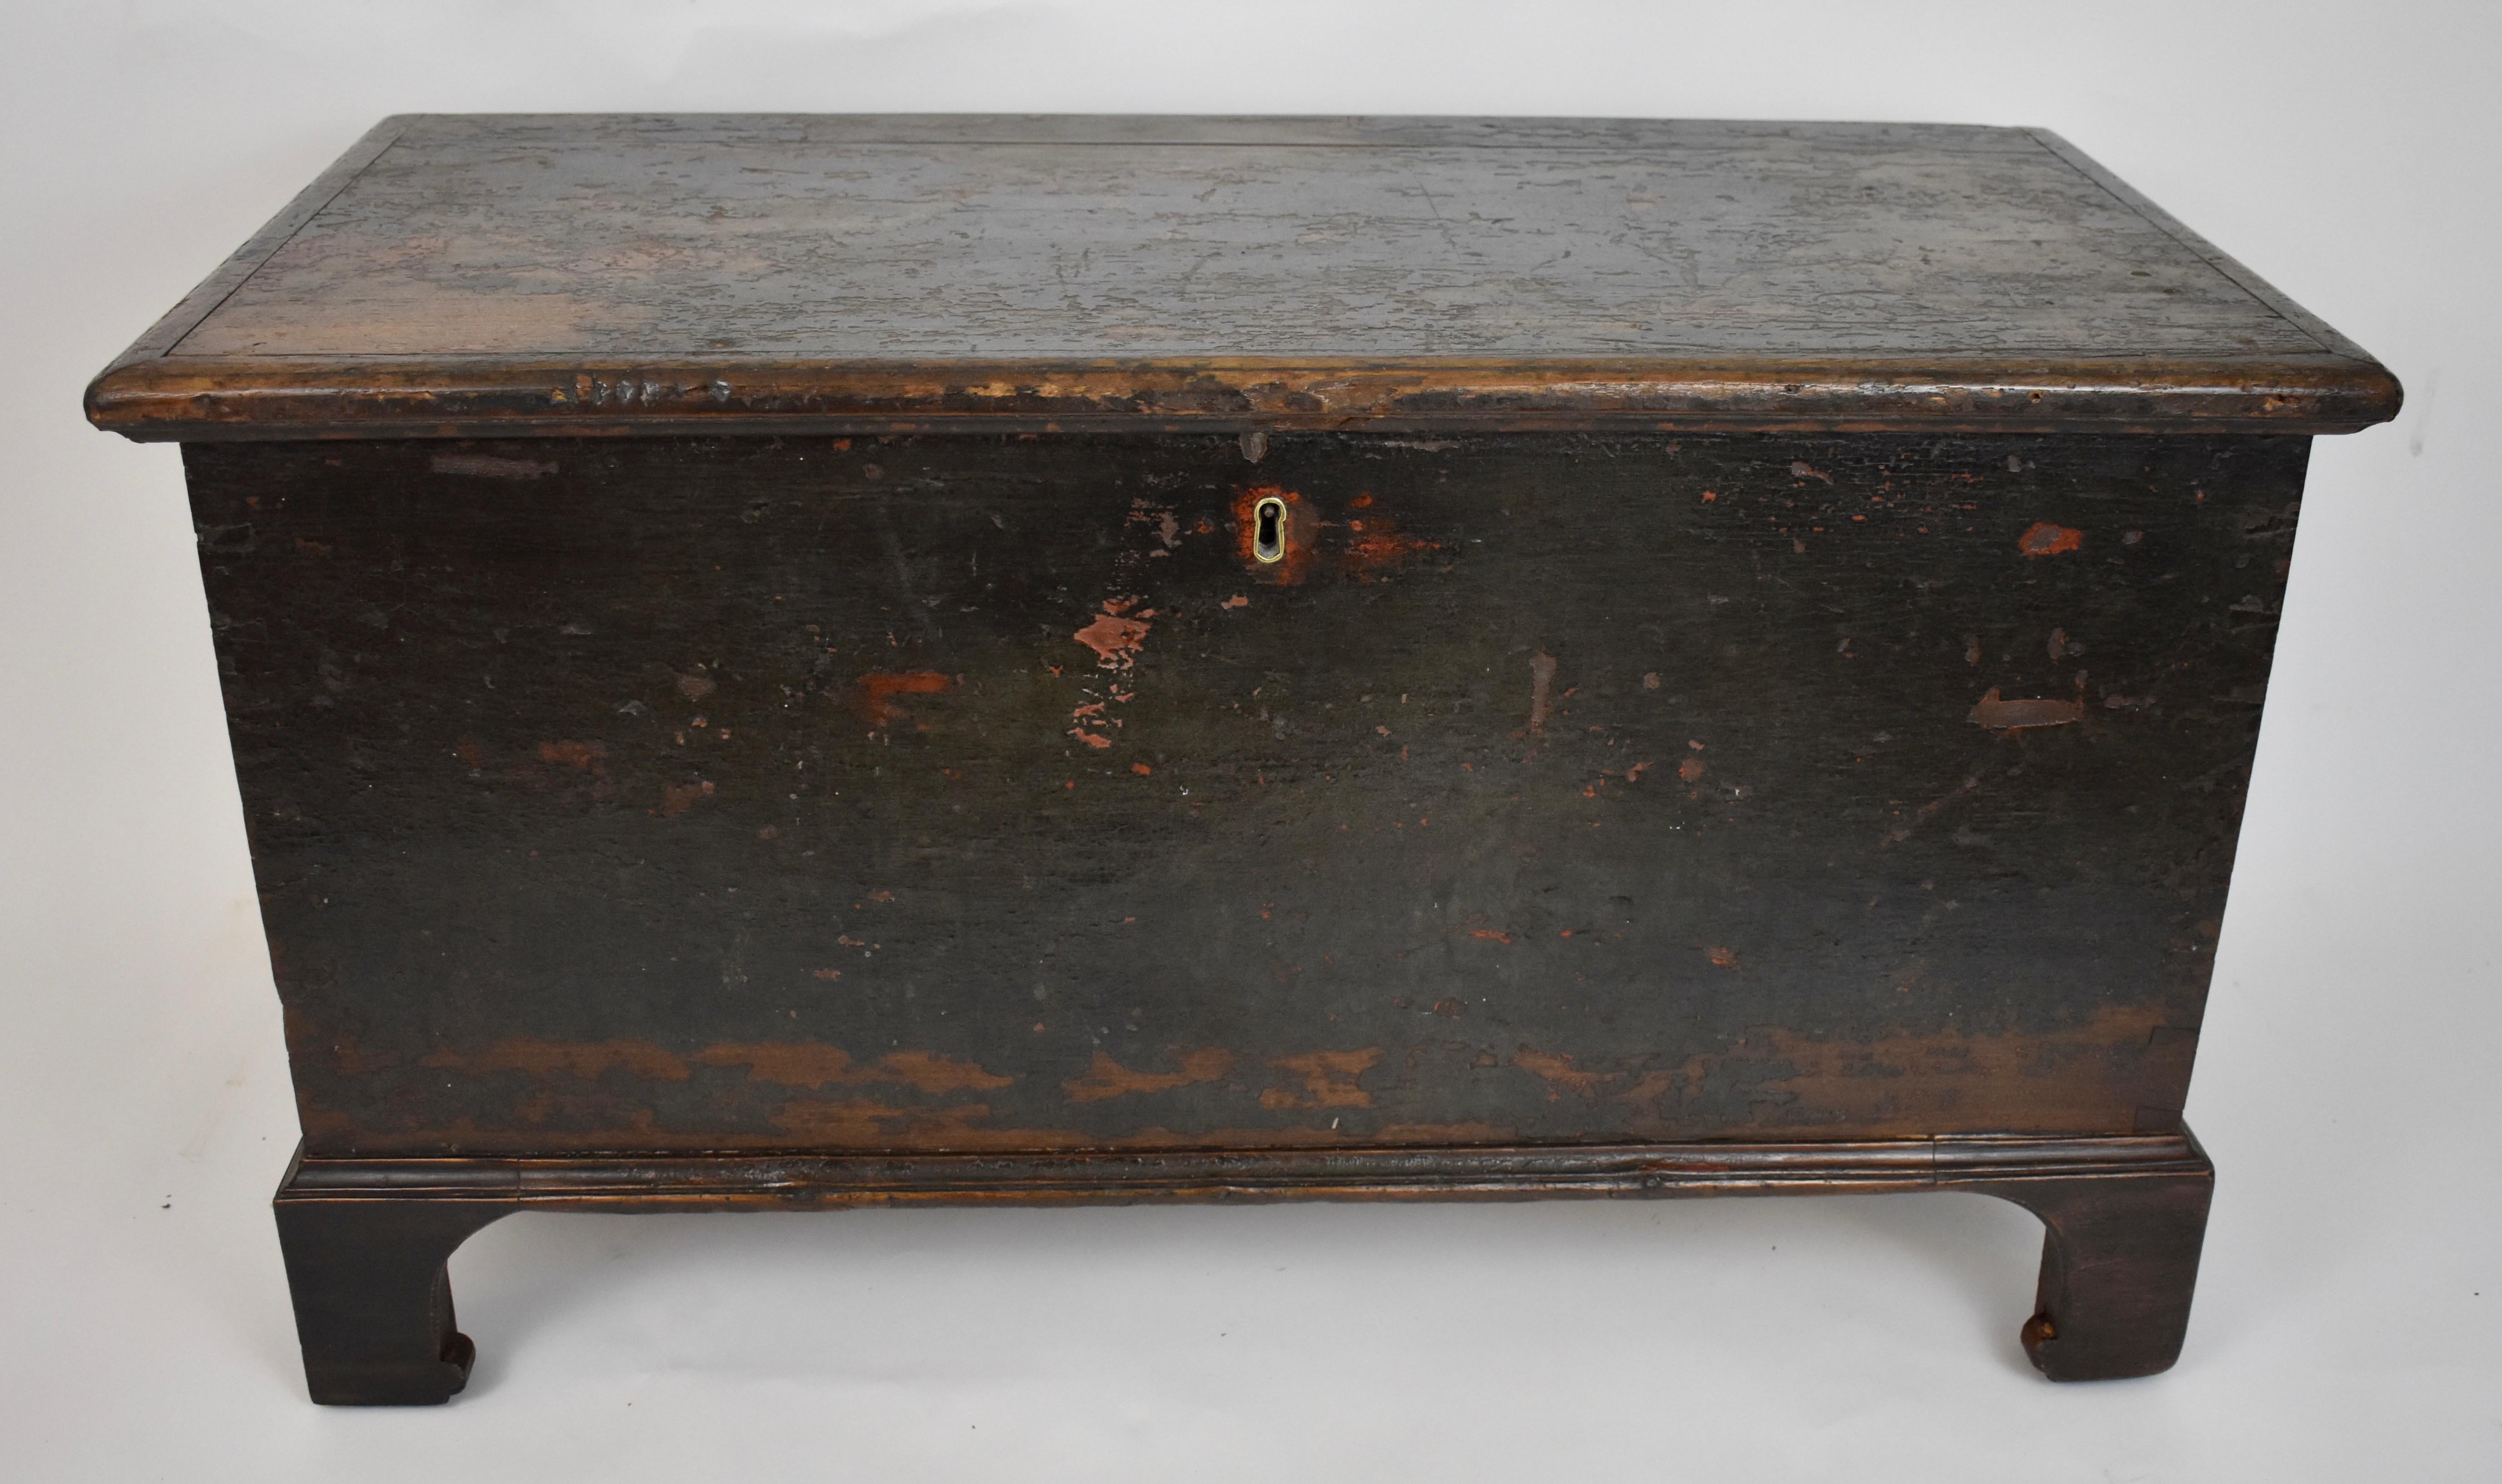 This pretty little poplar chest has developed a lovely patina with dark paint worn through to pumpkin orange and what looks like the remains of decorative floral work and to bare wood in places. The result is very attractive. The chest itself is